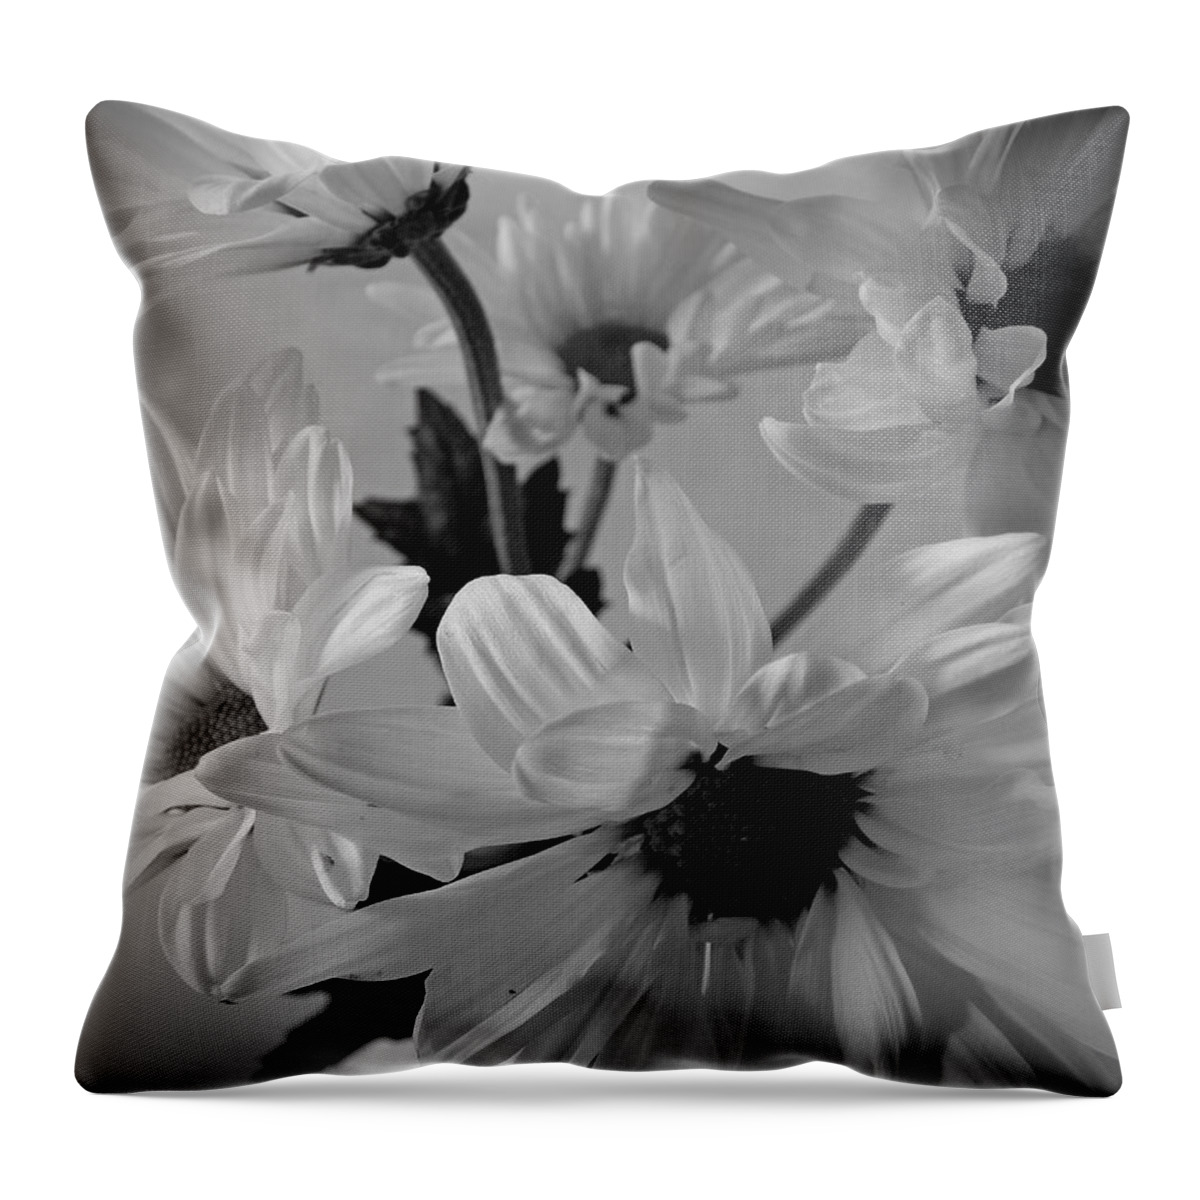 Flowers Throw Pillow featuring the photograph Daisies I Still Life Flower Art Poster by Lily Malor